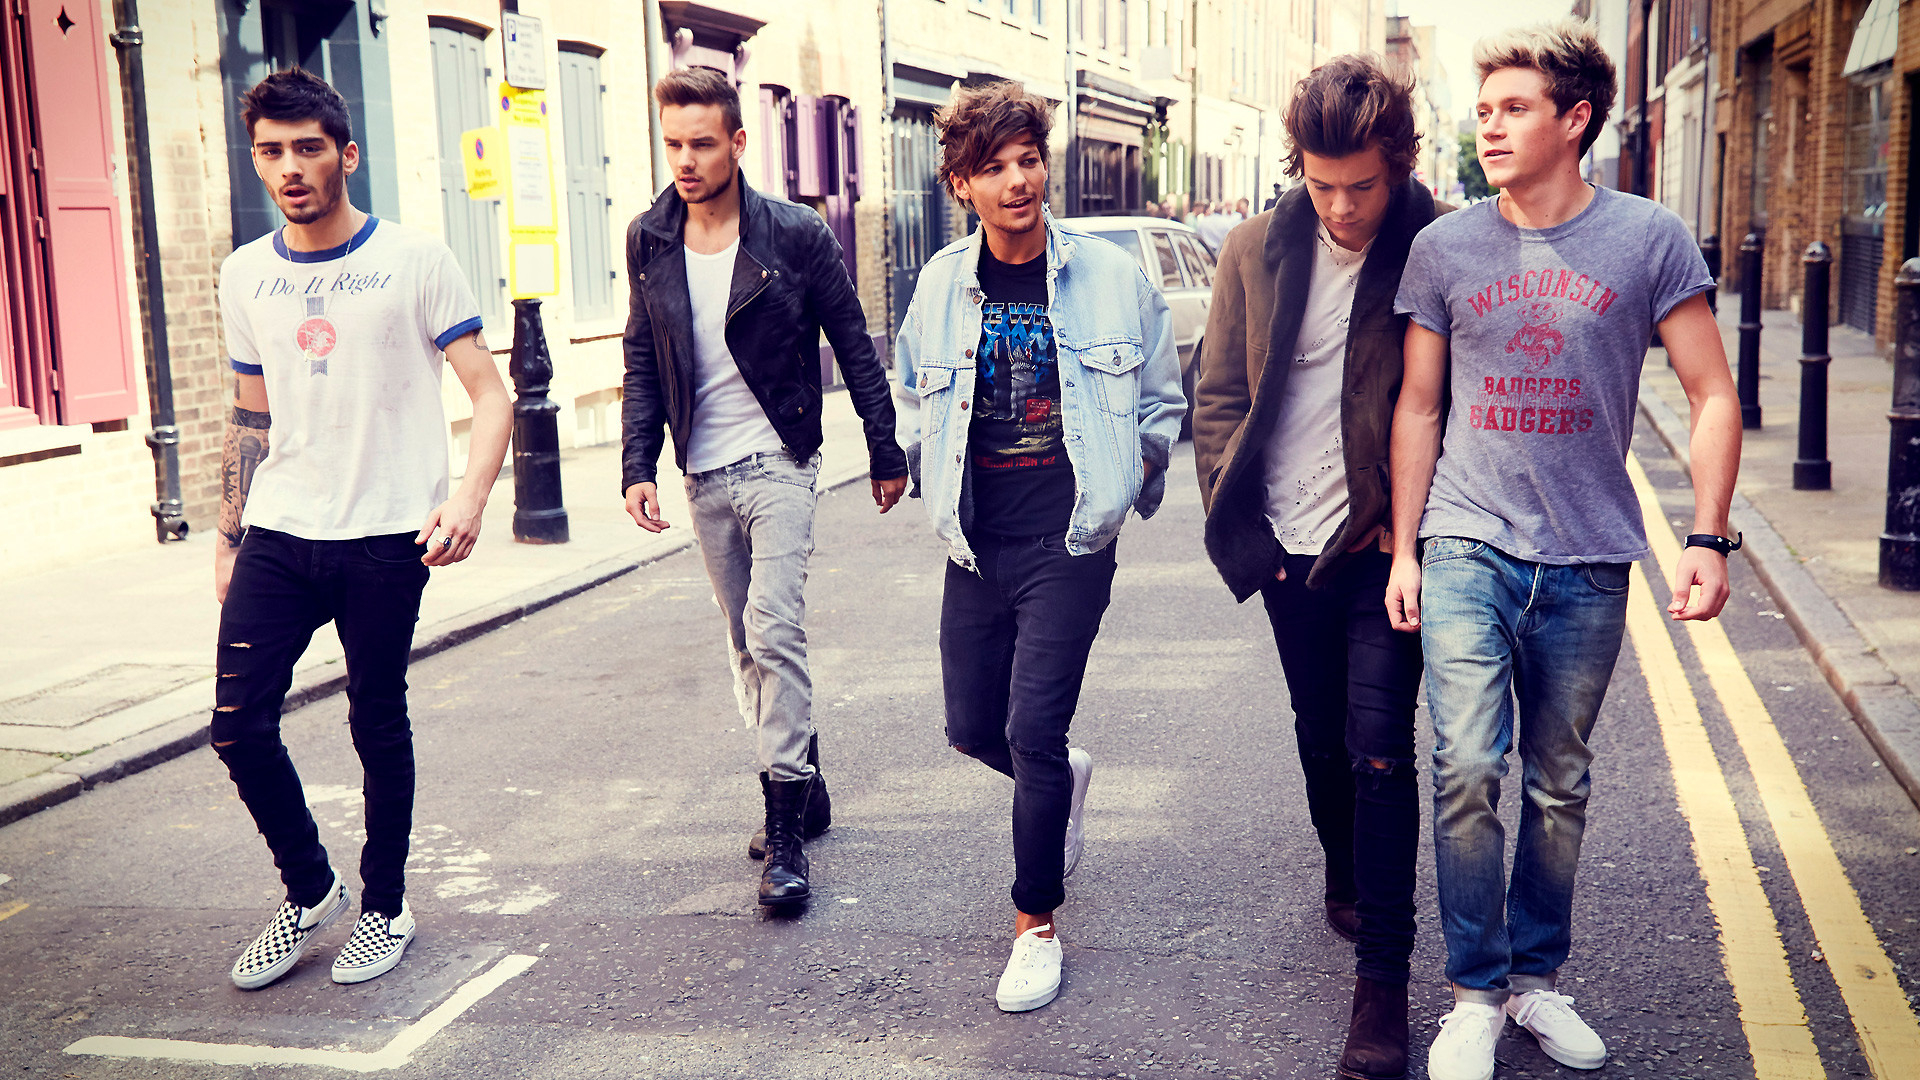 1920x1080 One Direction Wallpaper Take Me Home Hd posted by Ethan Sellers